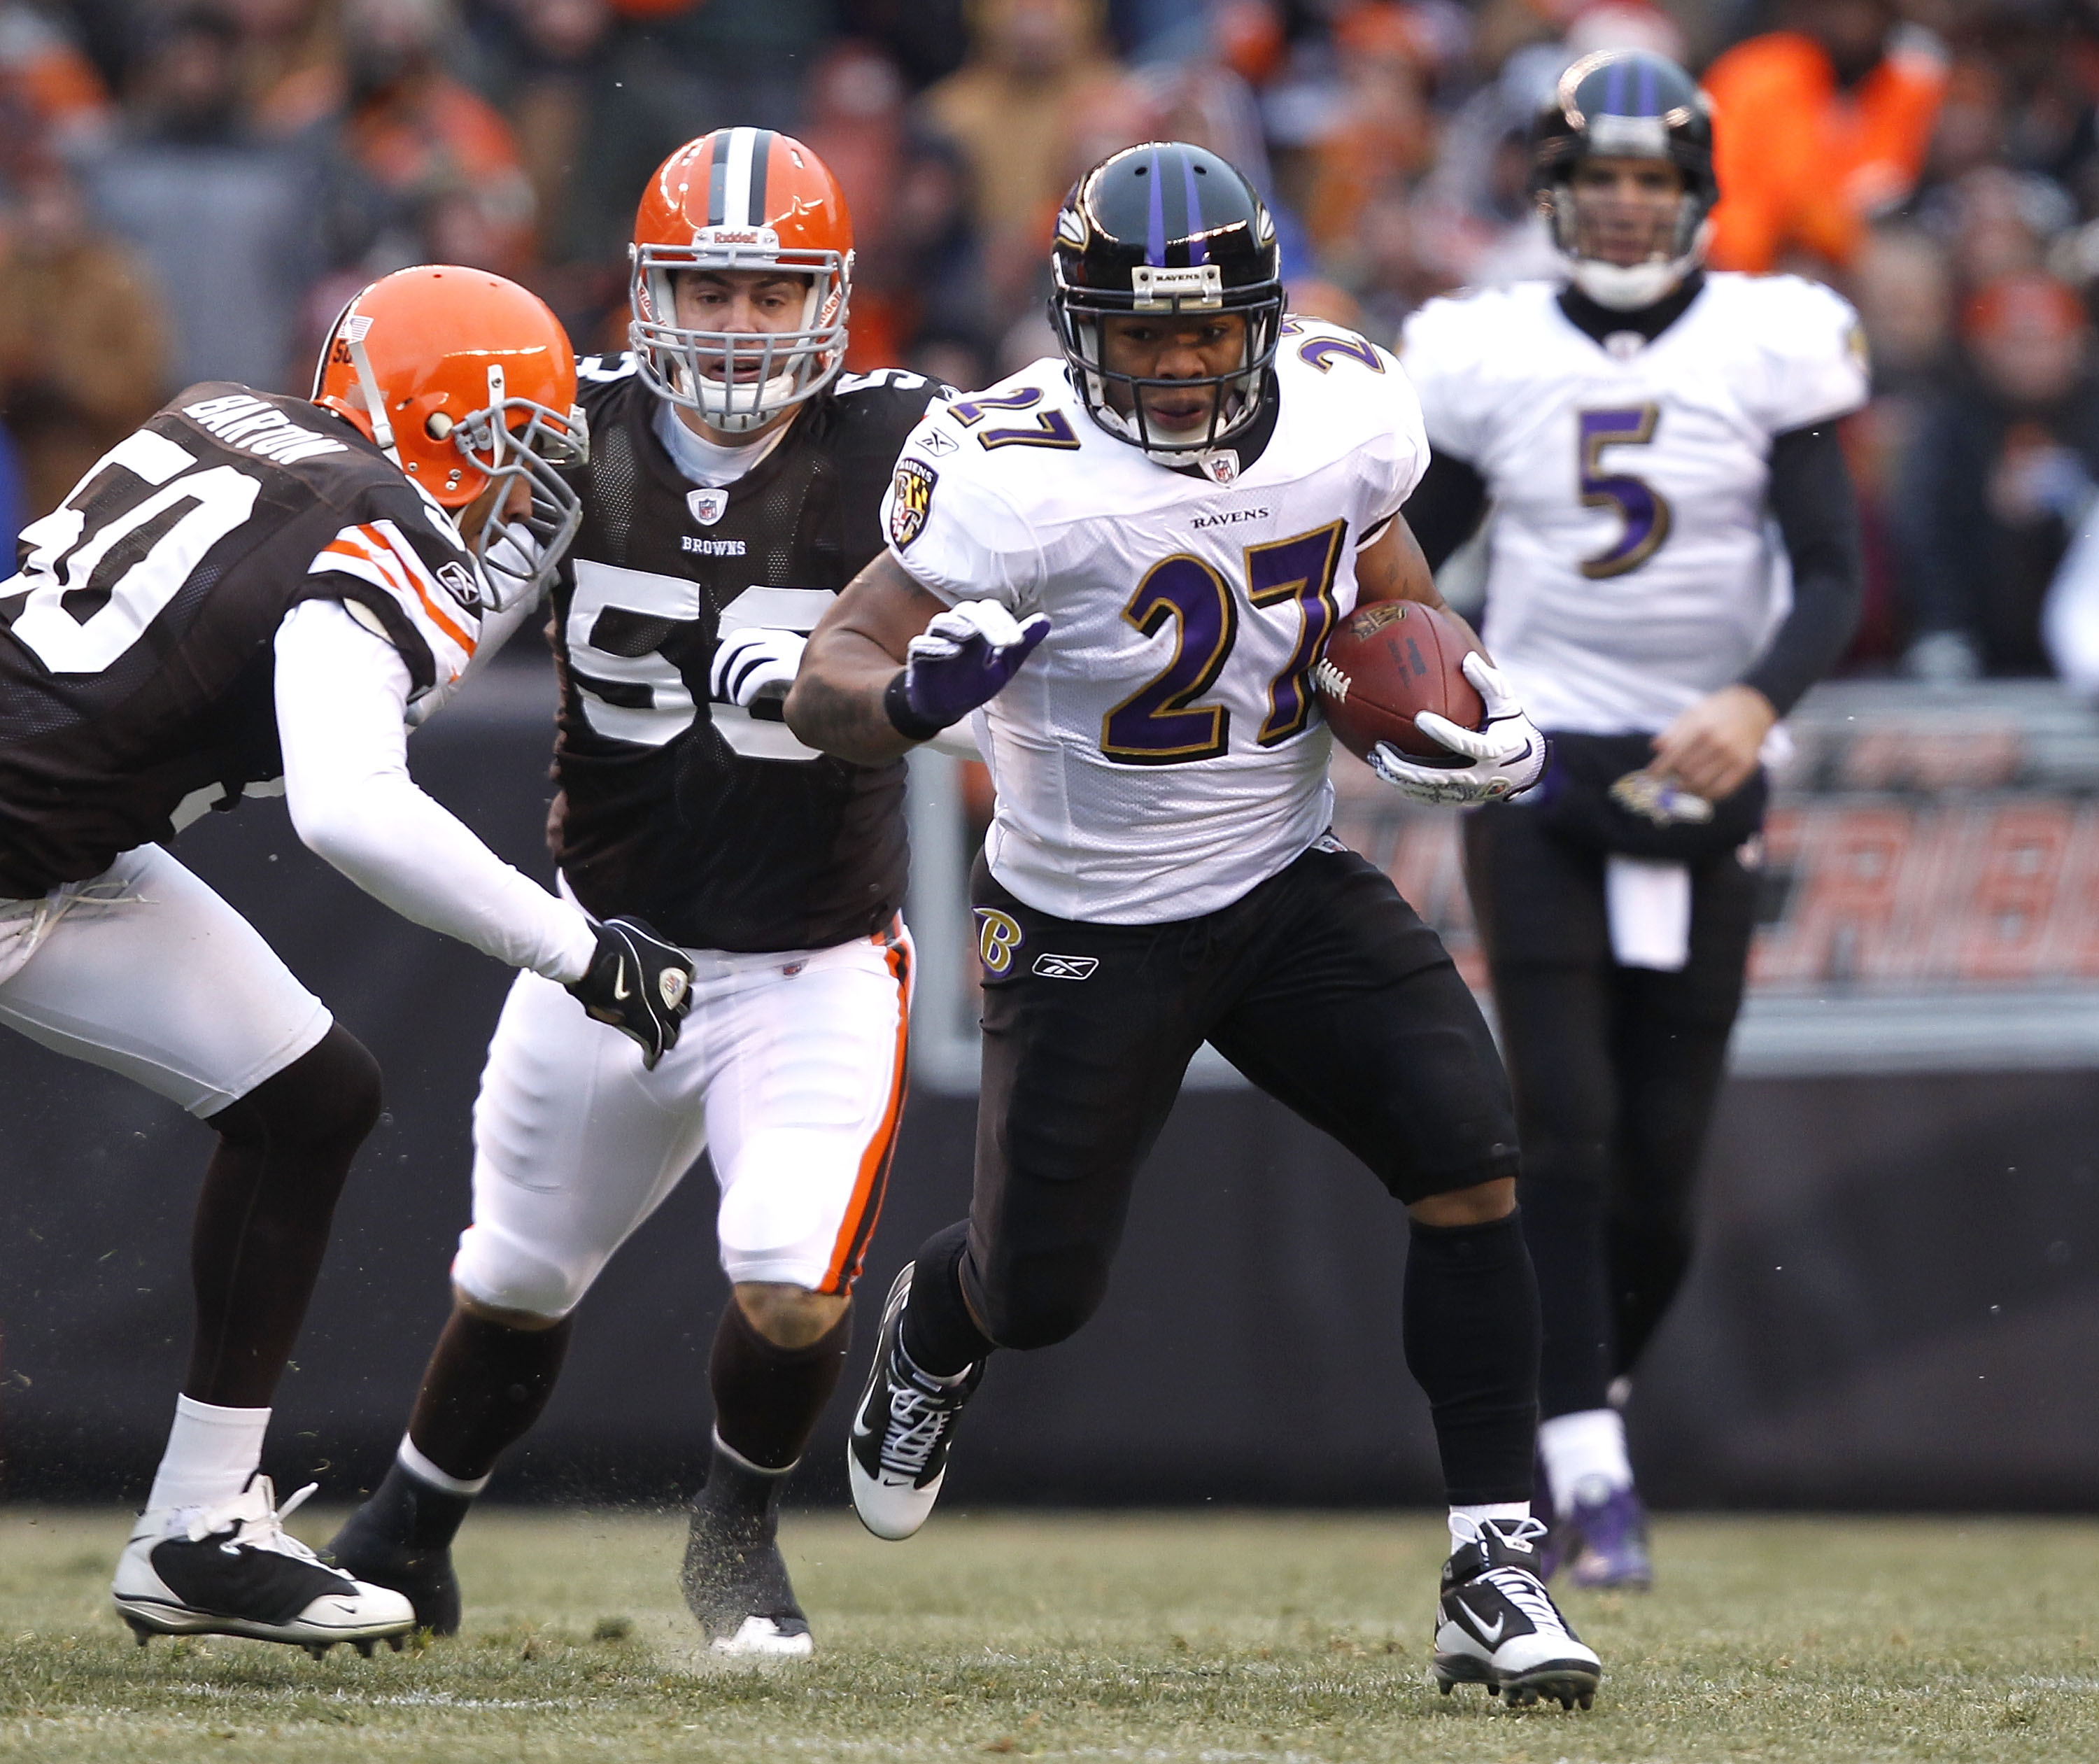 CLEVELAND - DECEMBER 26:  Running back Ray Rice #27 of the Baltimore Ravens runs by linebackers Eric Barton #50 and Matt Roth #53 of the Cleveland Browns at Cleveland Browns Stadium on December 26, 2010 in Cleveland, Ohio.  (Photo by Matt Sullivan/Getty I